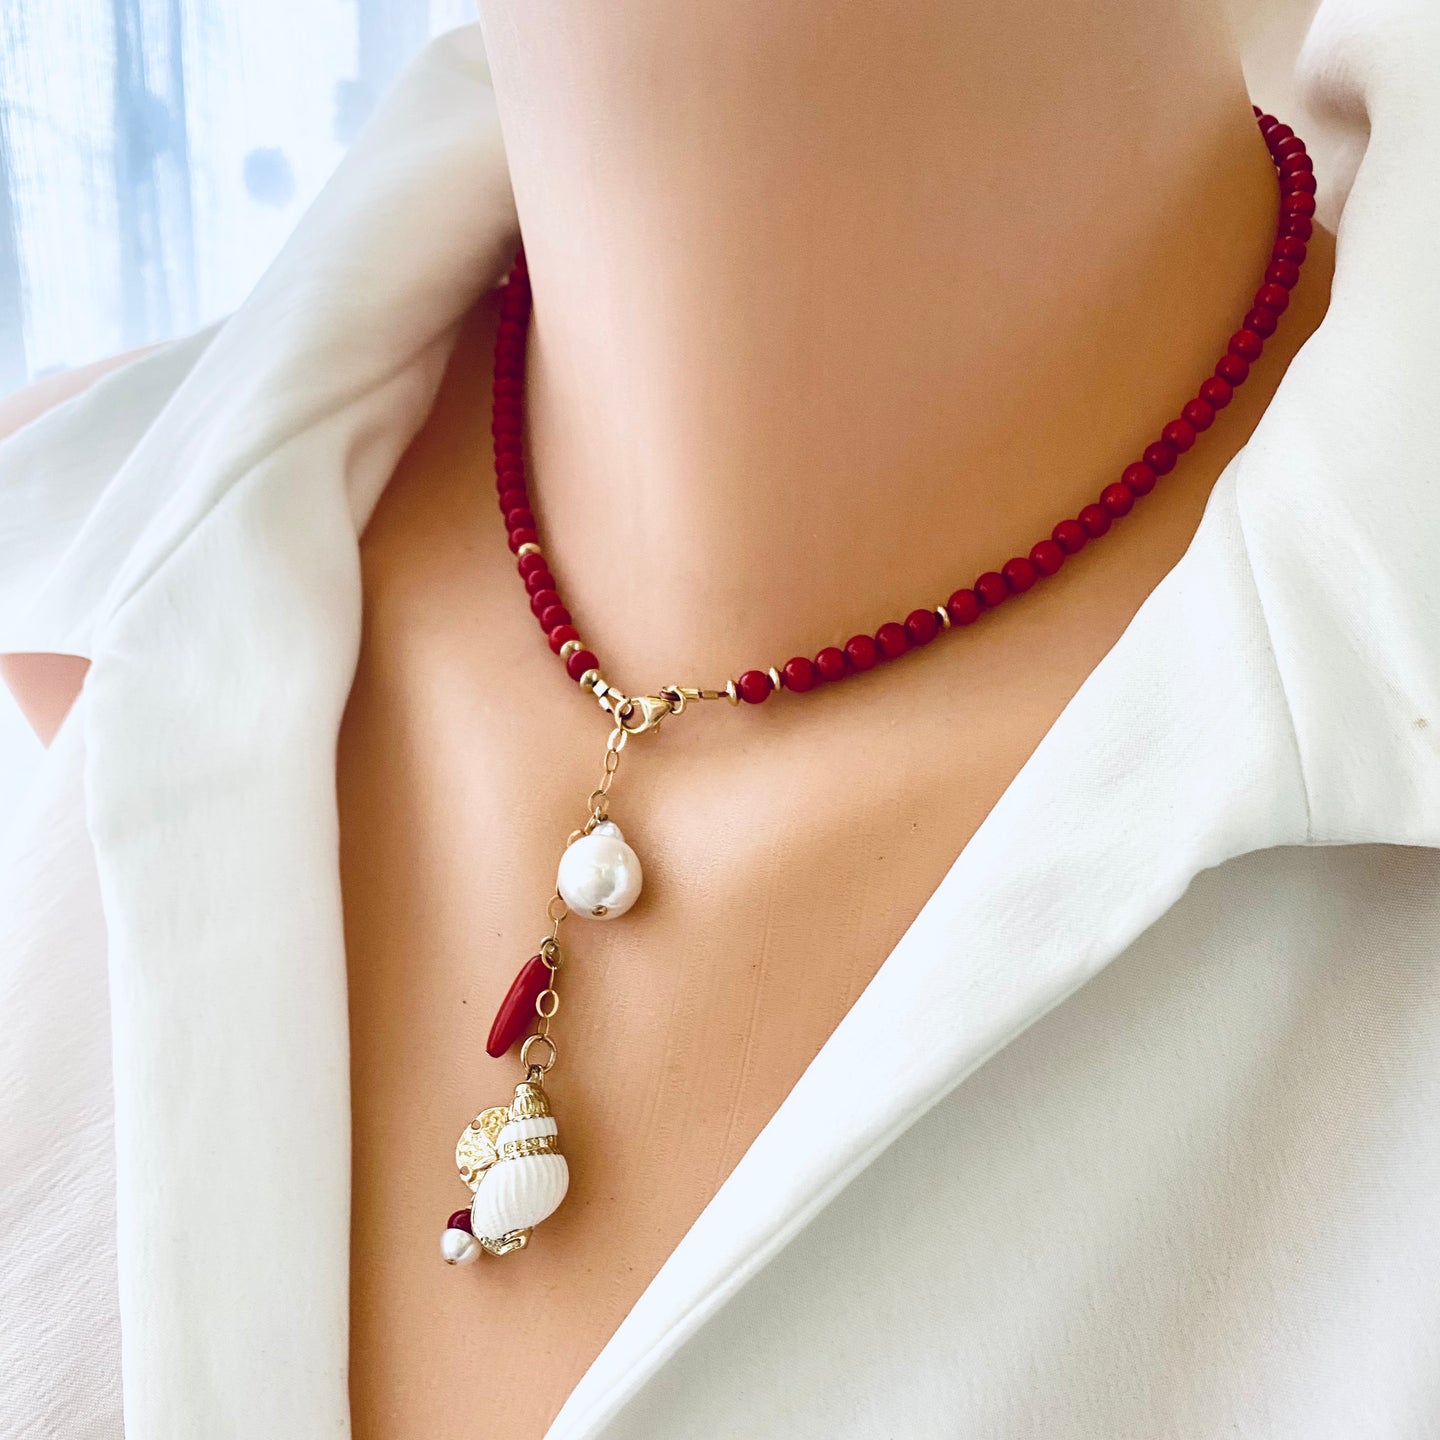 Red Coral Necklace with a tiny sea shell and Pearl Pendant